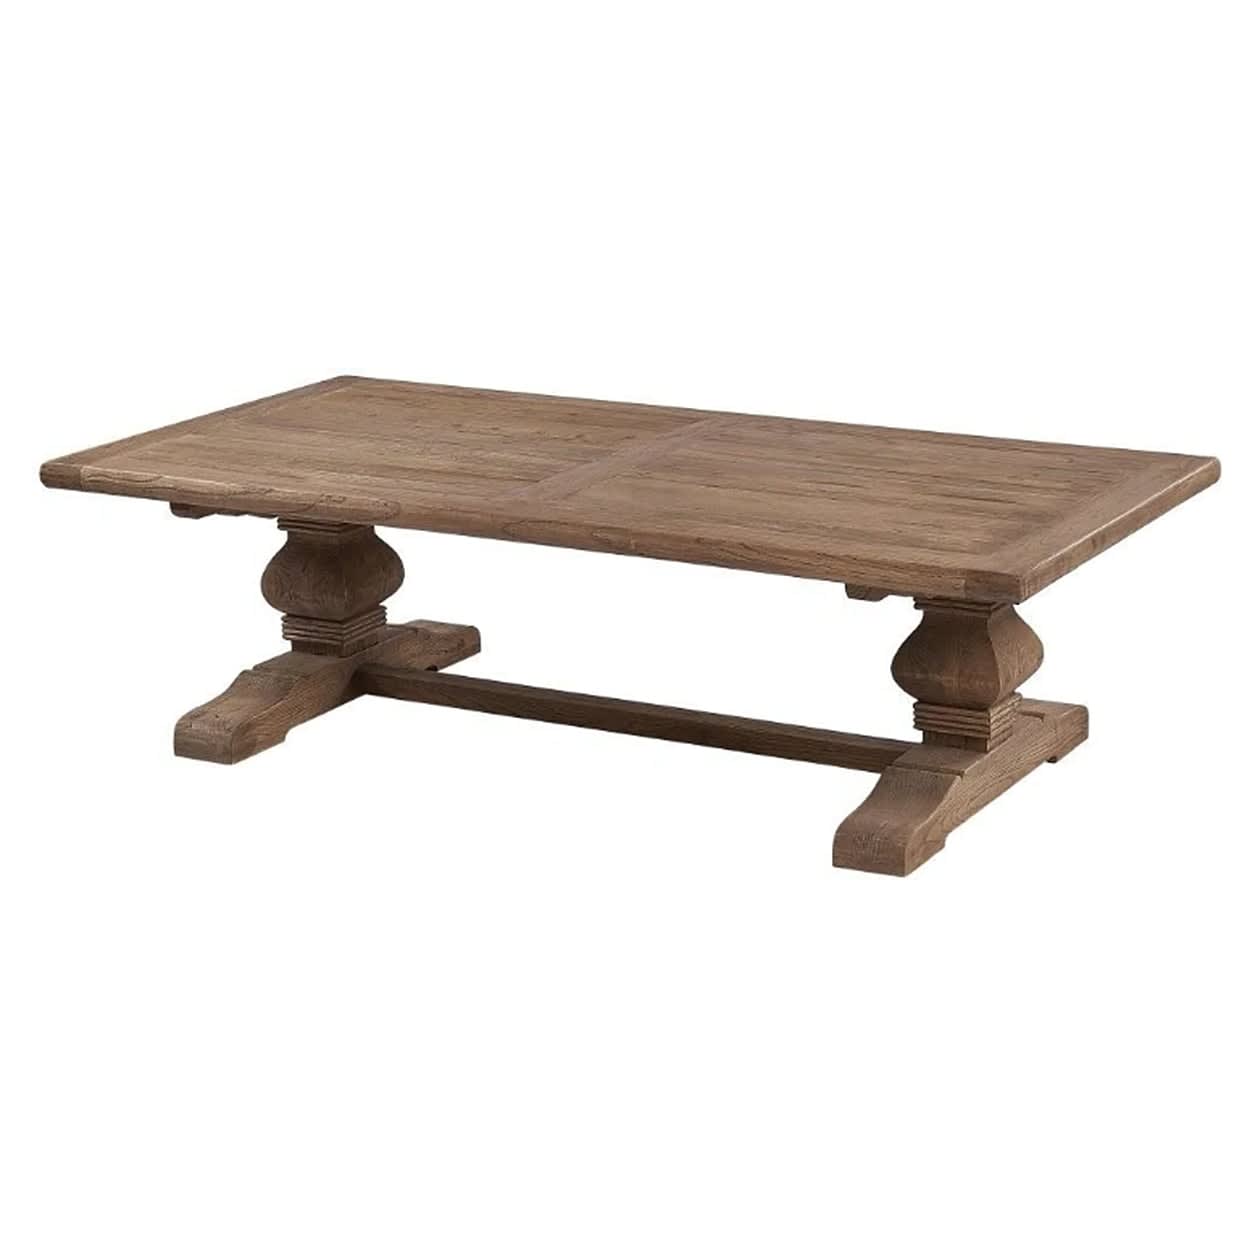 Farmhouse Rustic Wooden Coffee Table